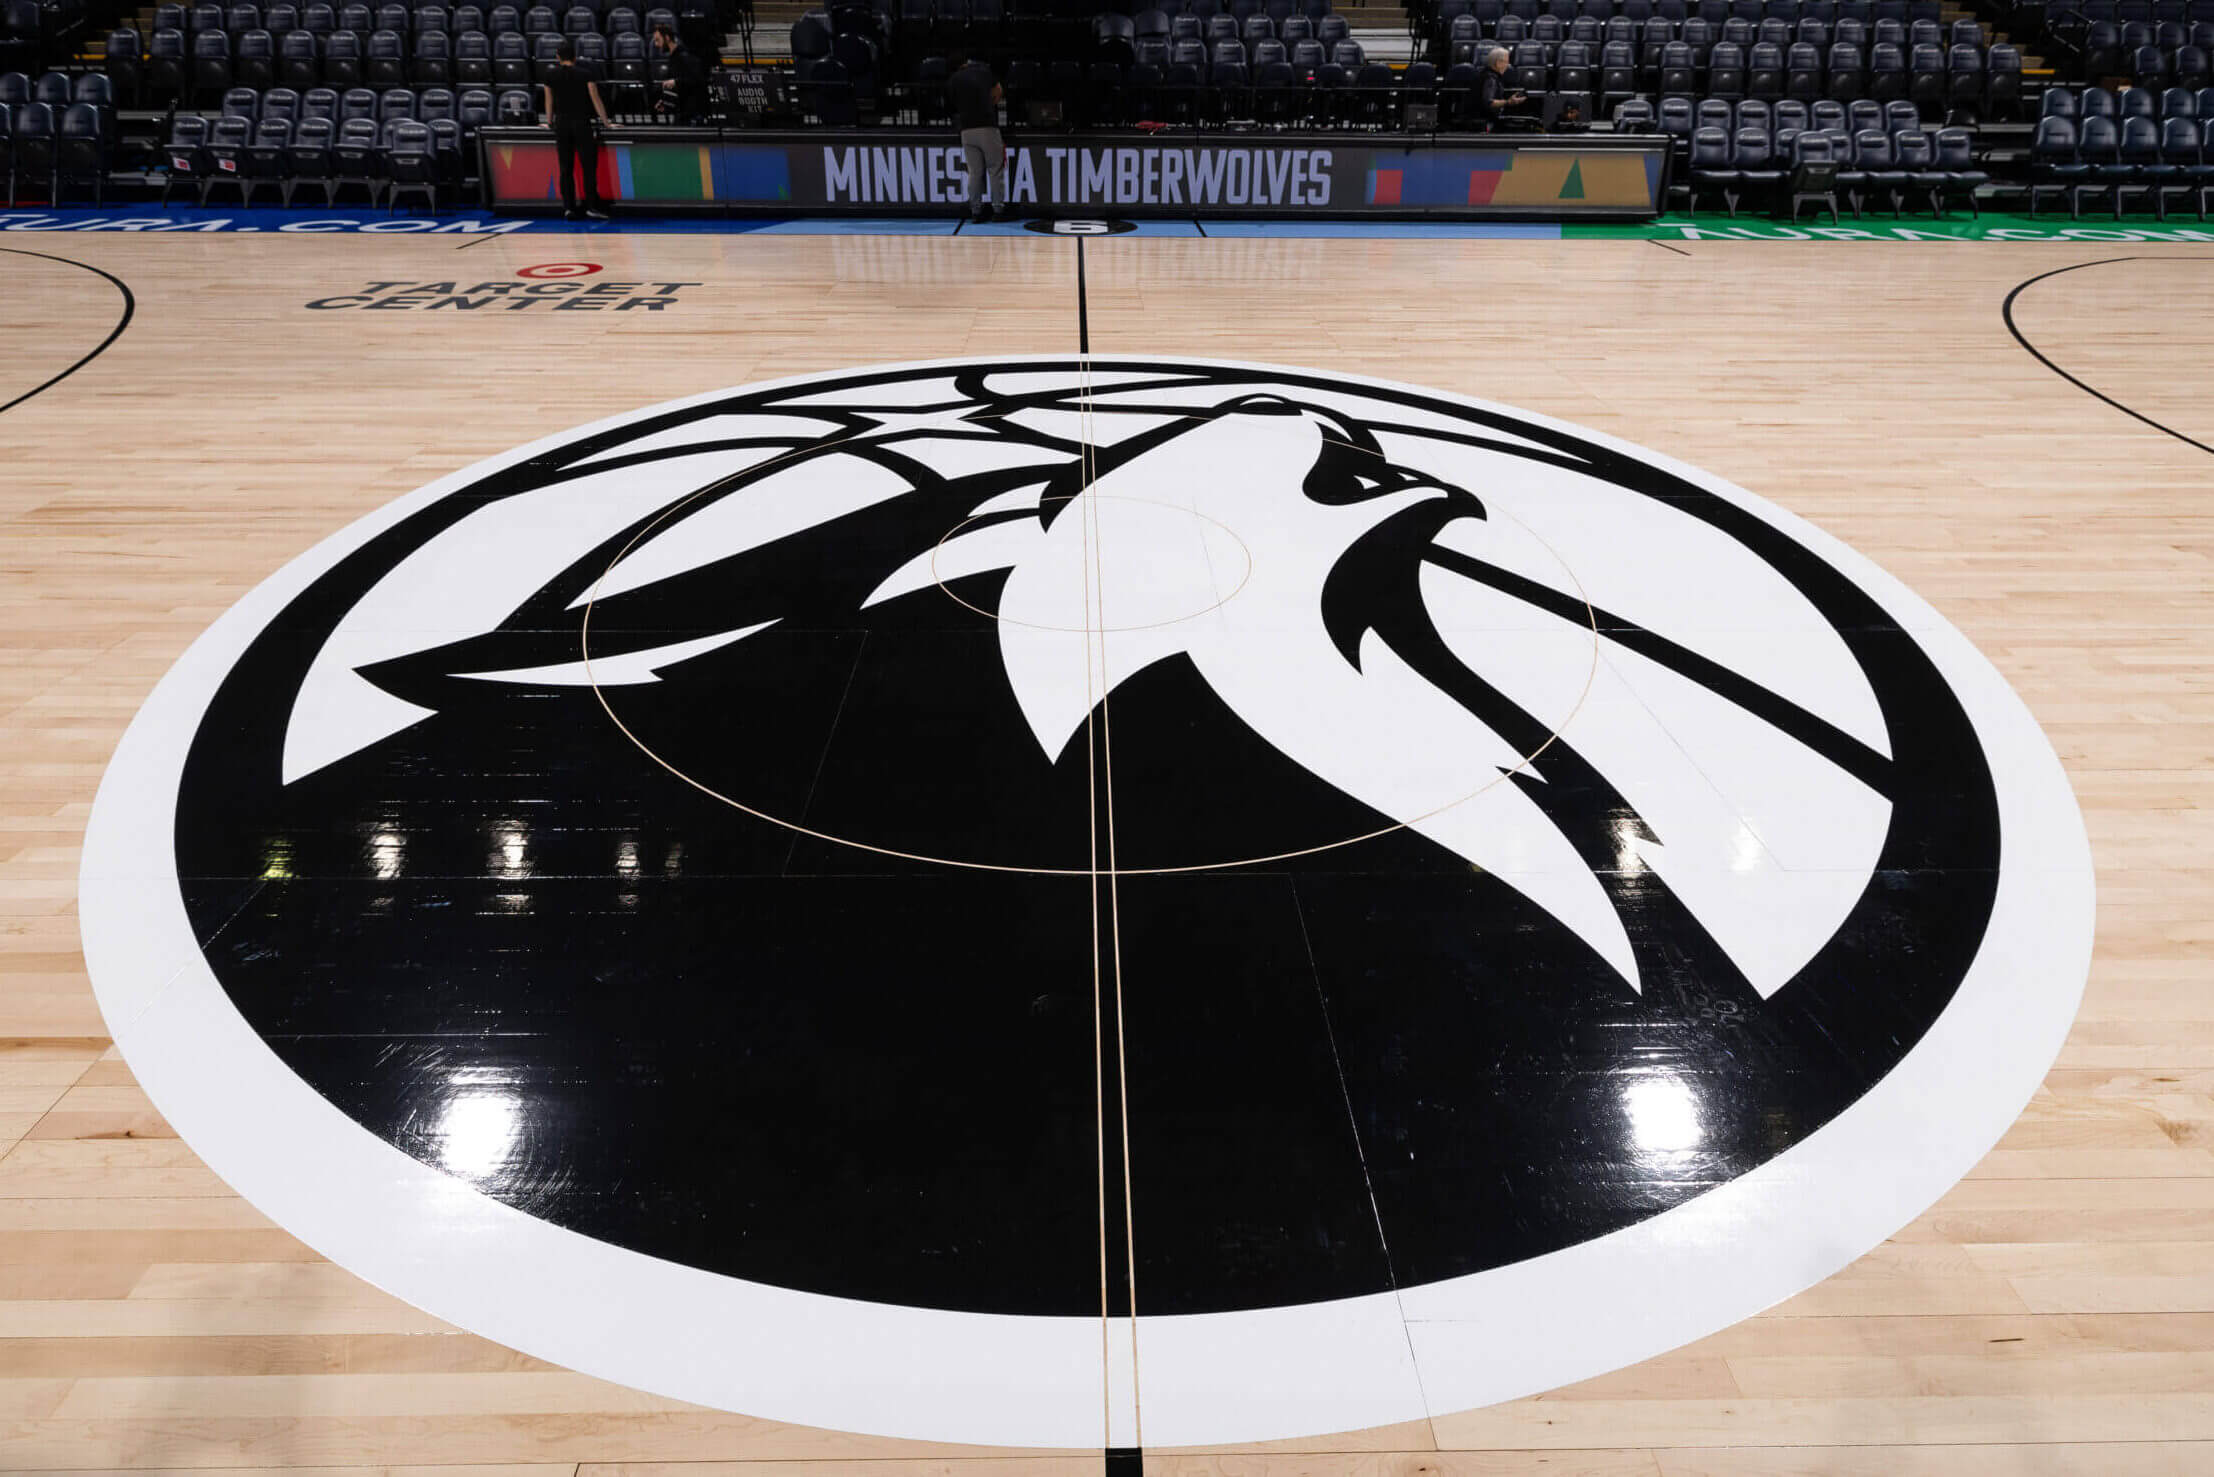 Fired Timberwolves employee charged for allegedly stealing team info and personal data